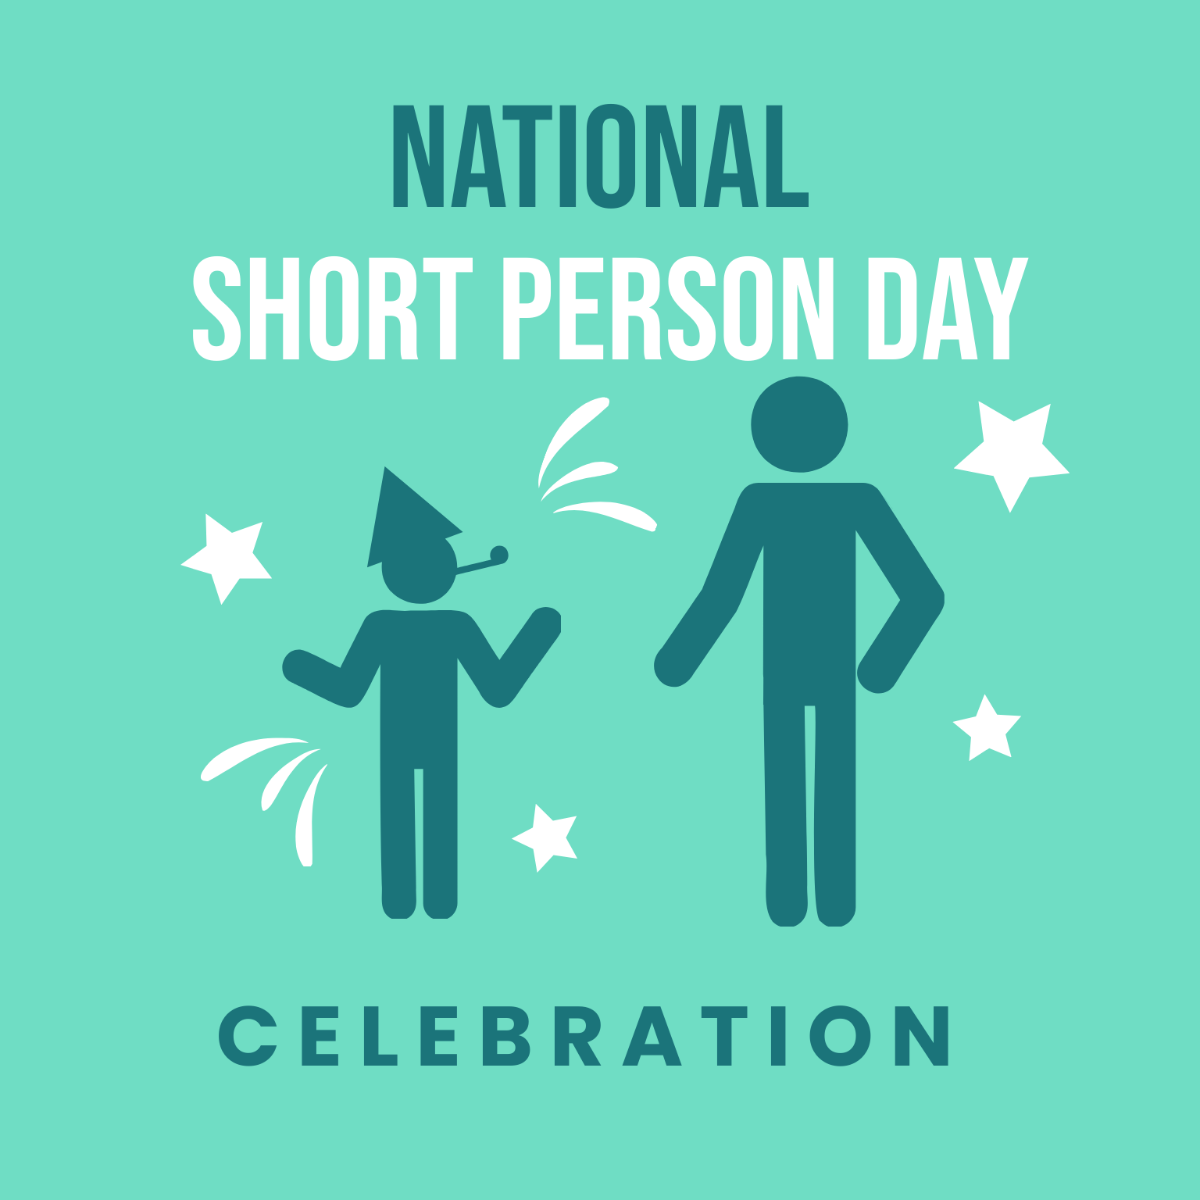 National Short Person Day Celebration Vector Template